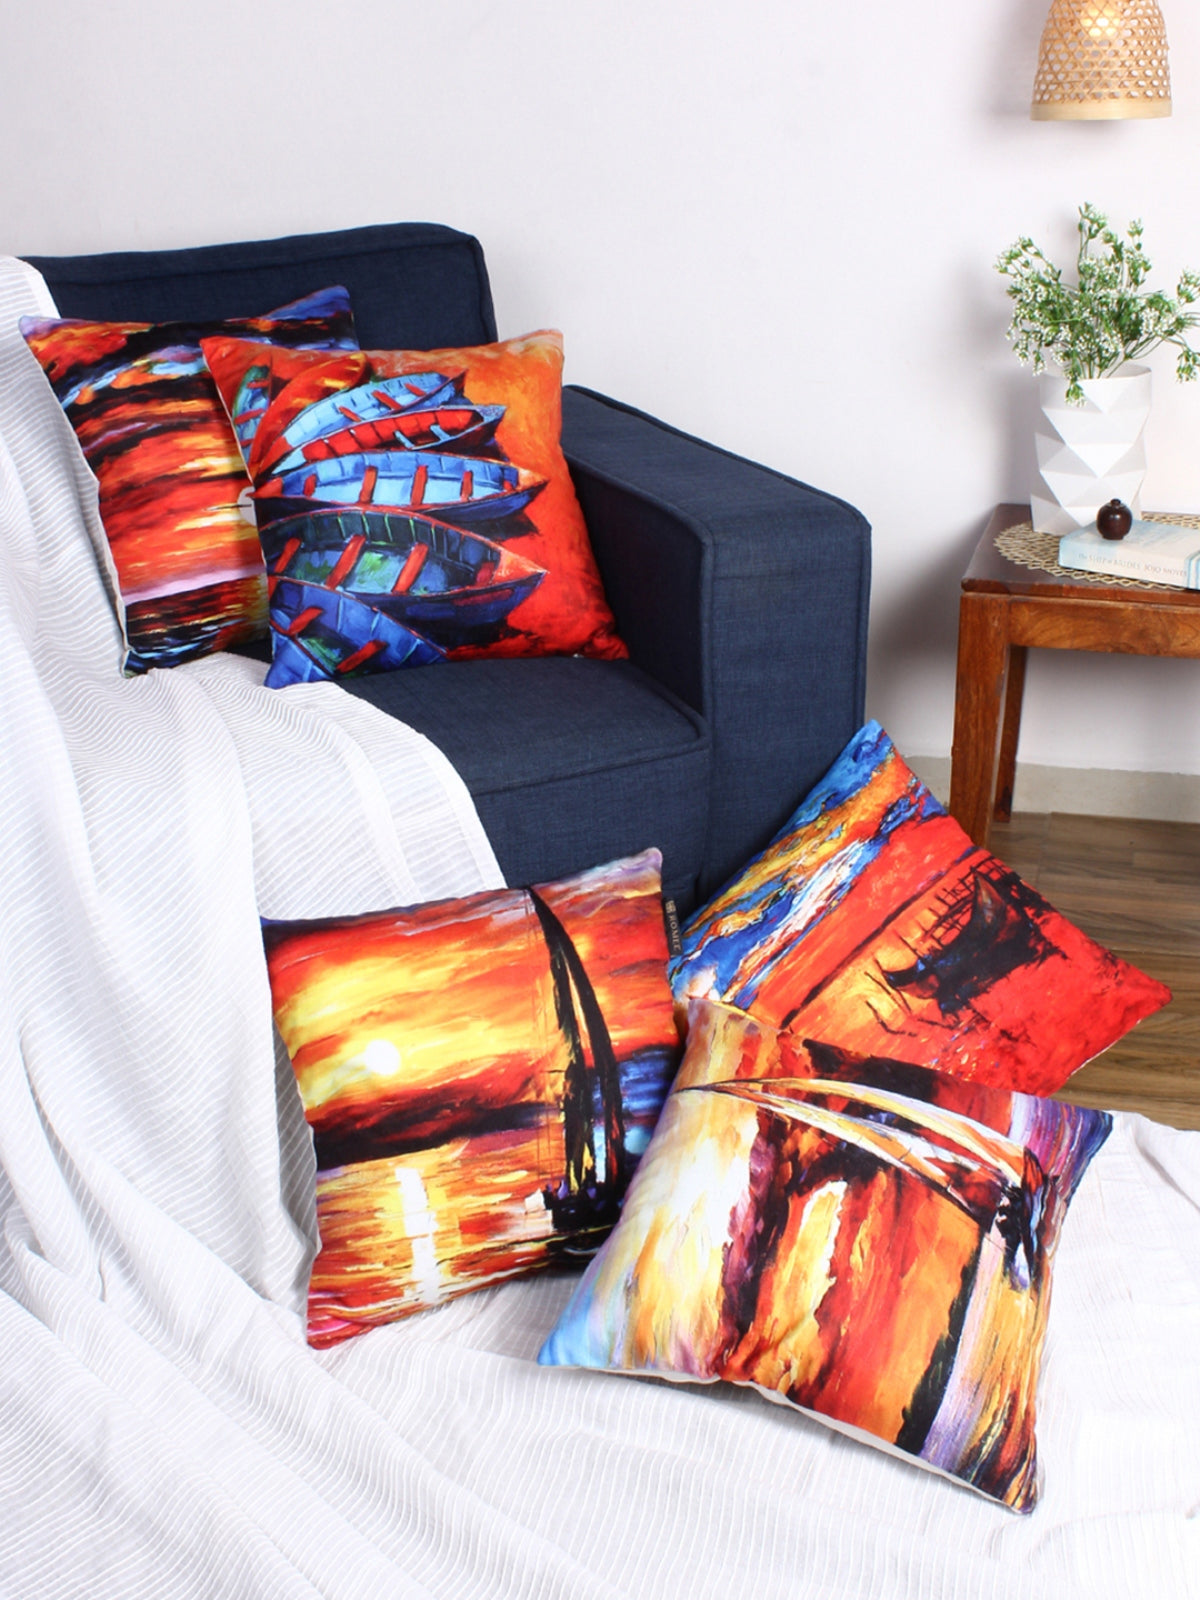 Polyester Velvet Fabric 3D Printed Cushion Cover 16x16 Set of 5 - Multicolor